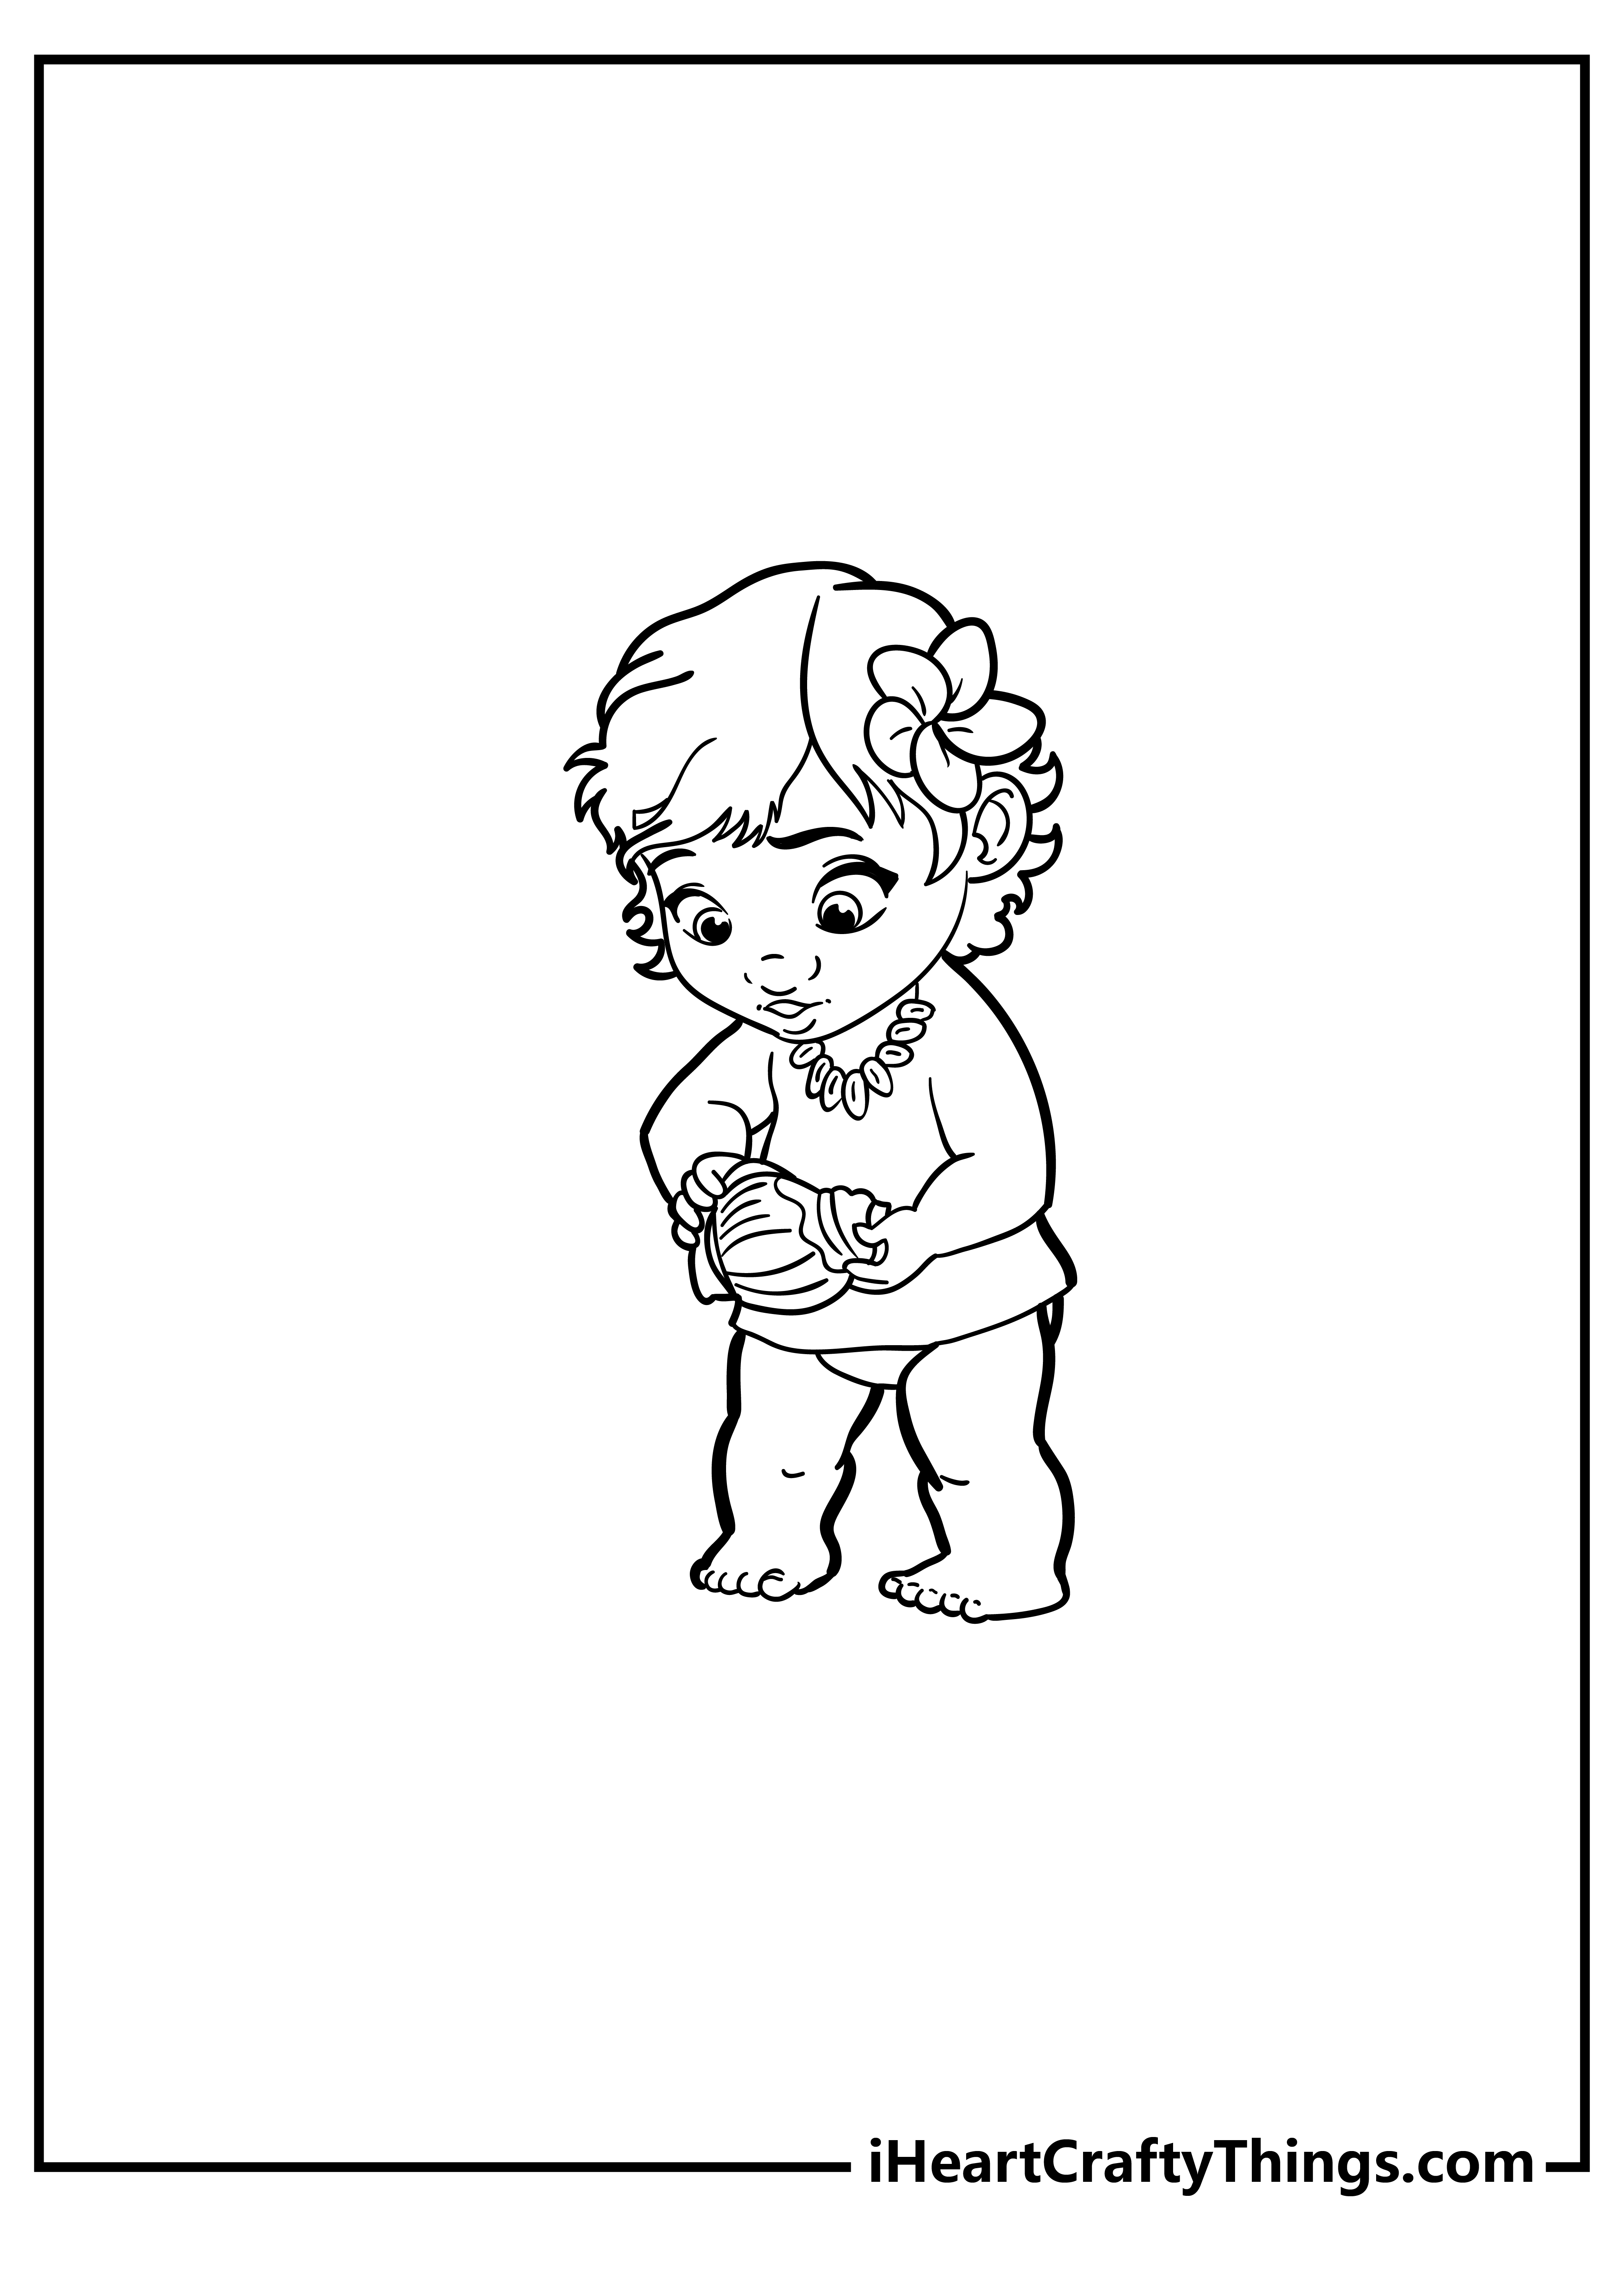 Moana Coloring Pages for adults free printable